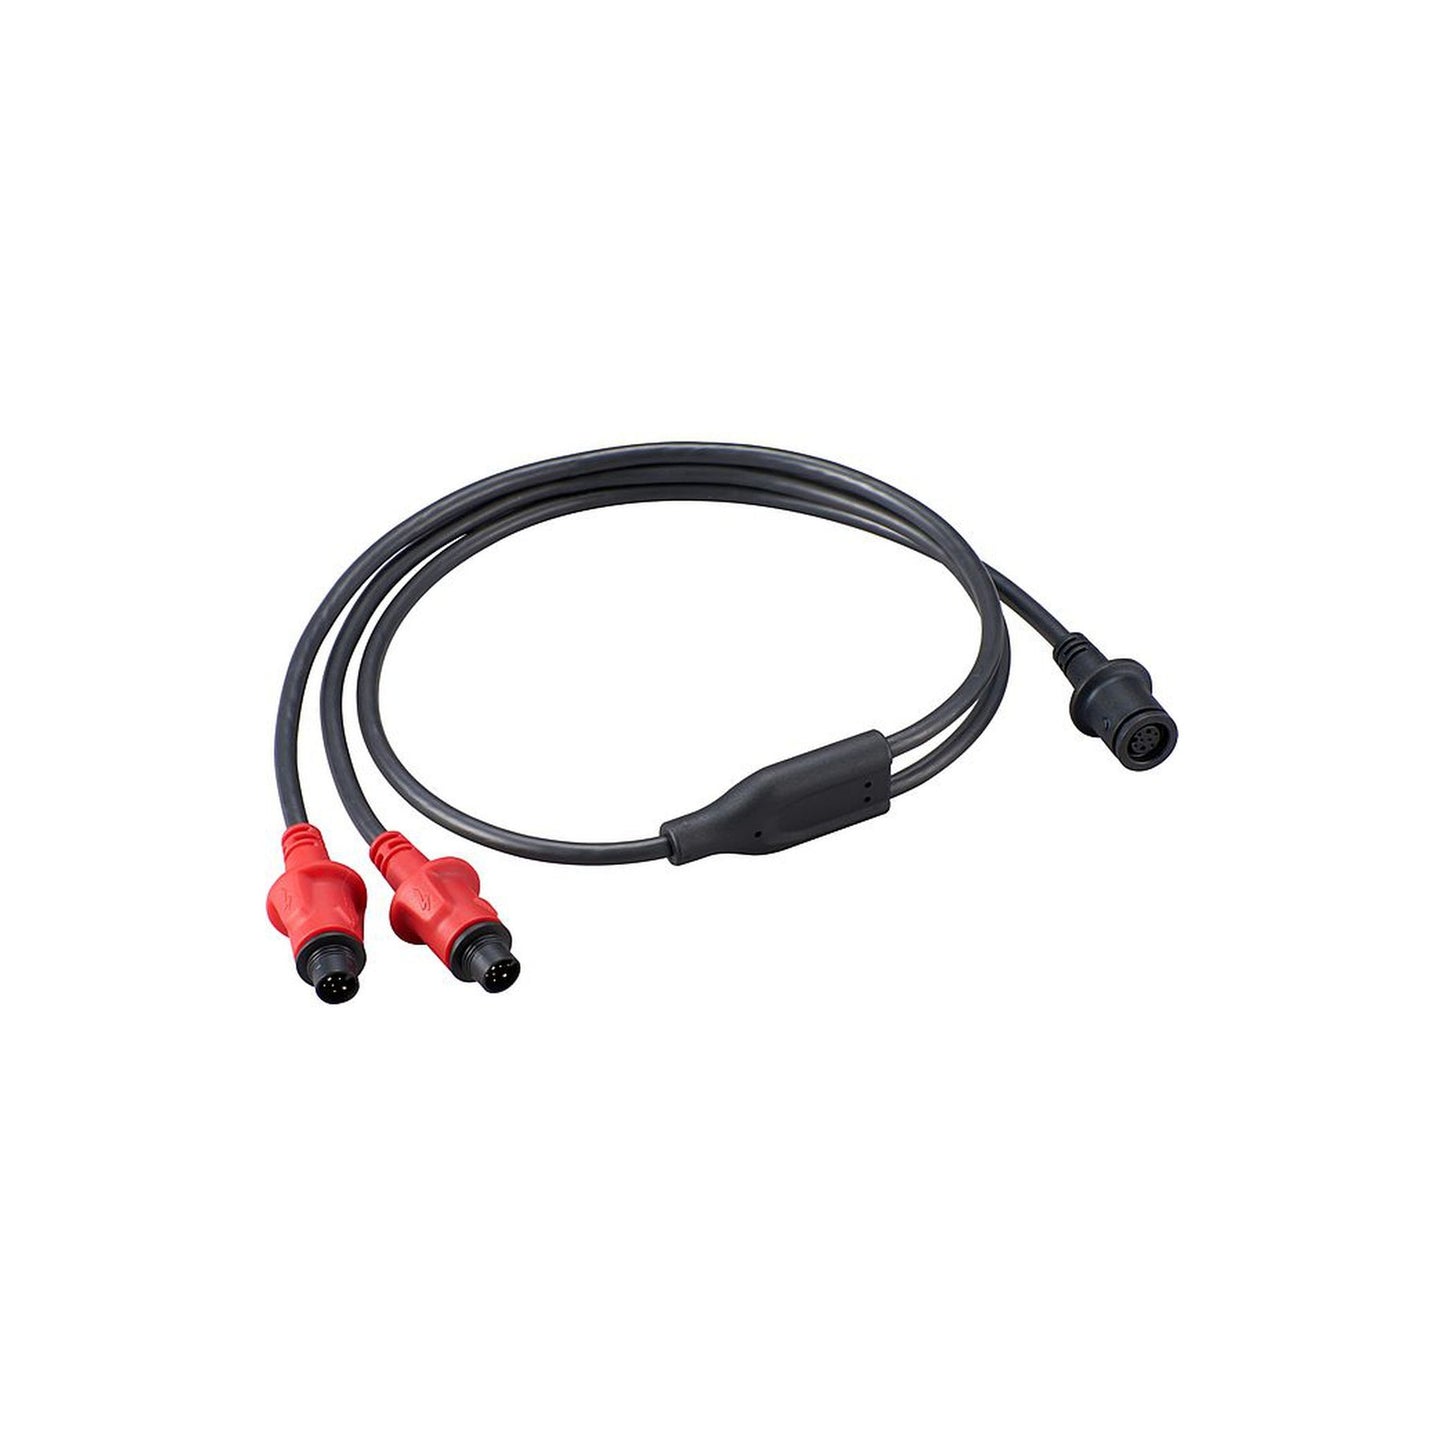 Turbo SL Y Charger Cable | completecyclist - Our Turbo SL Y-Charger Cable lets you simultaneously charge your Specialized SL Battery and Range Extender.